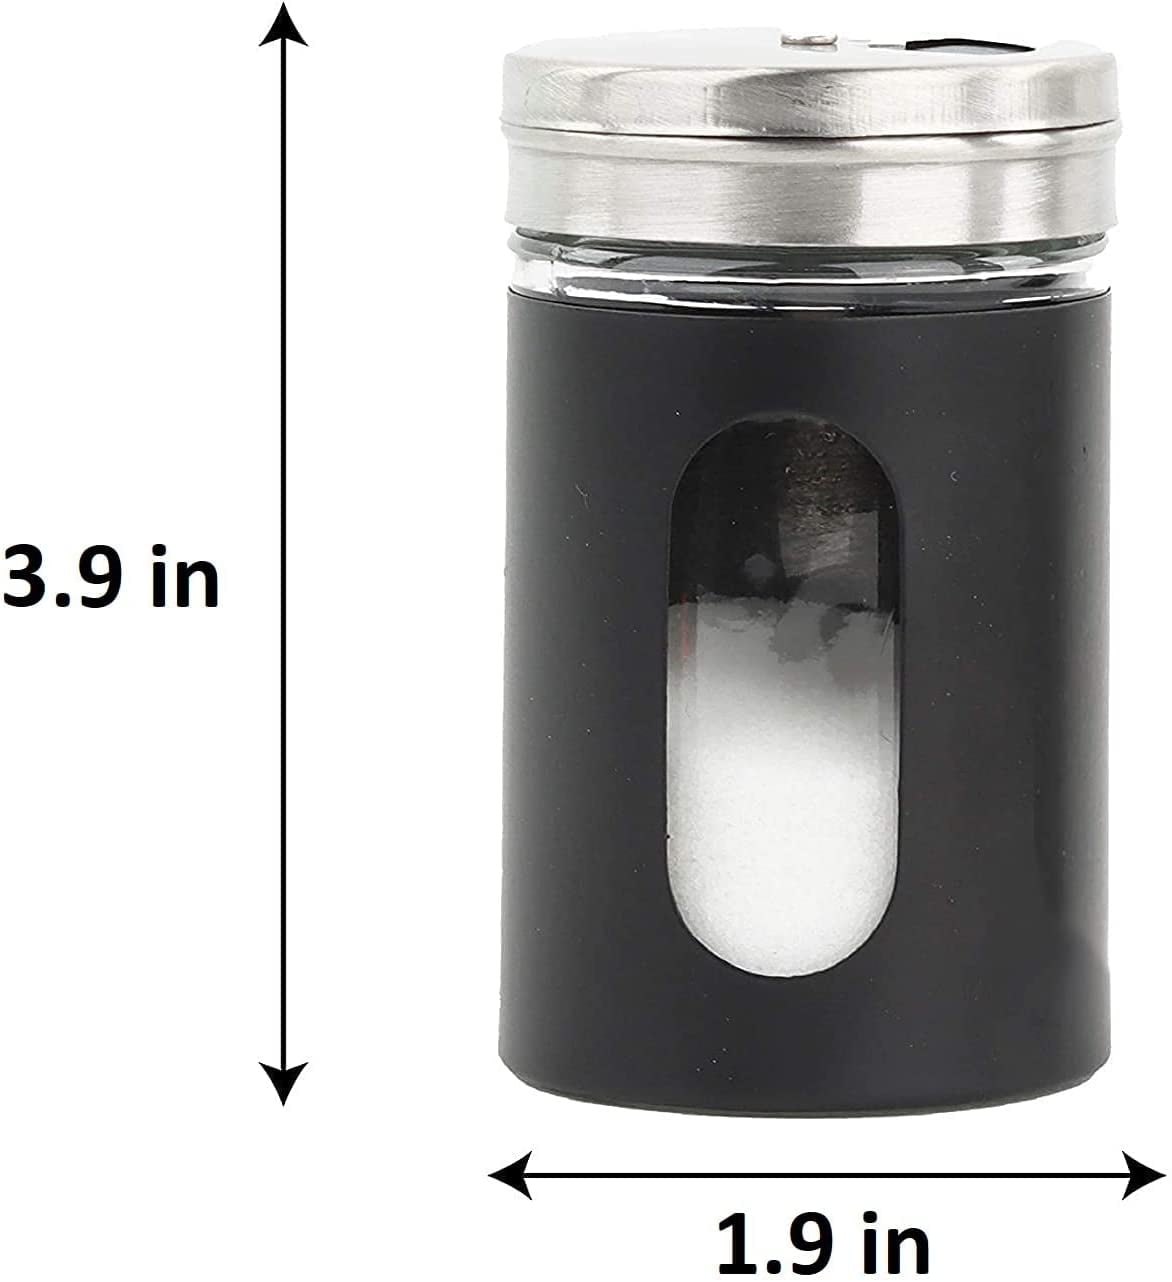 JVLM HOME Premium Glass Salt and Pepper Shakers Dispensers Set with Stainless Steel lids Black 